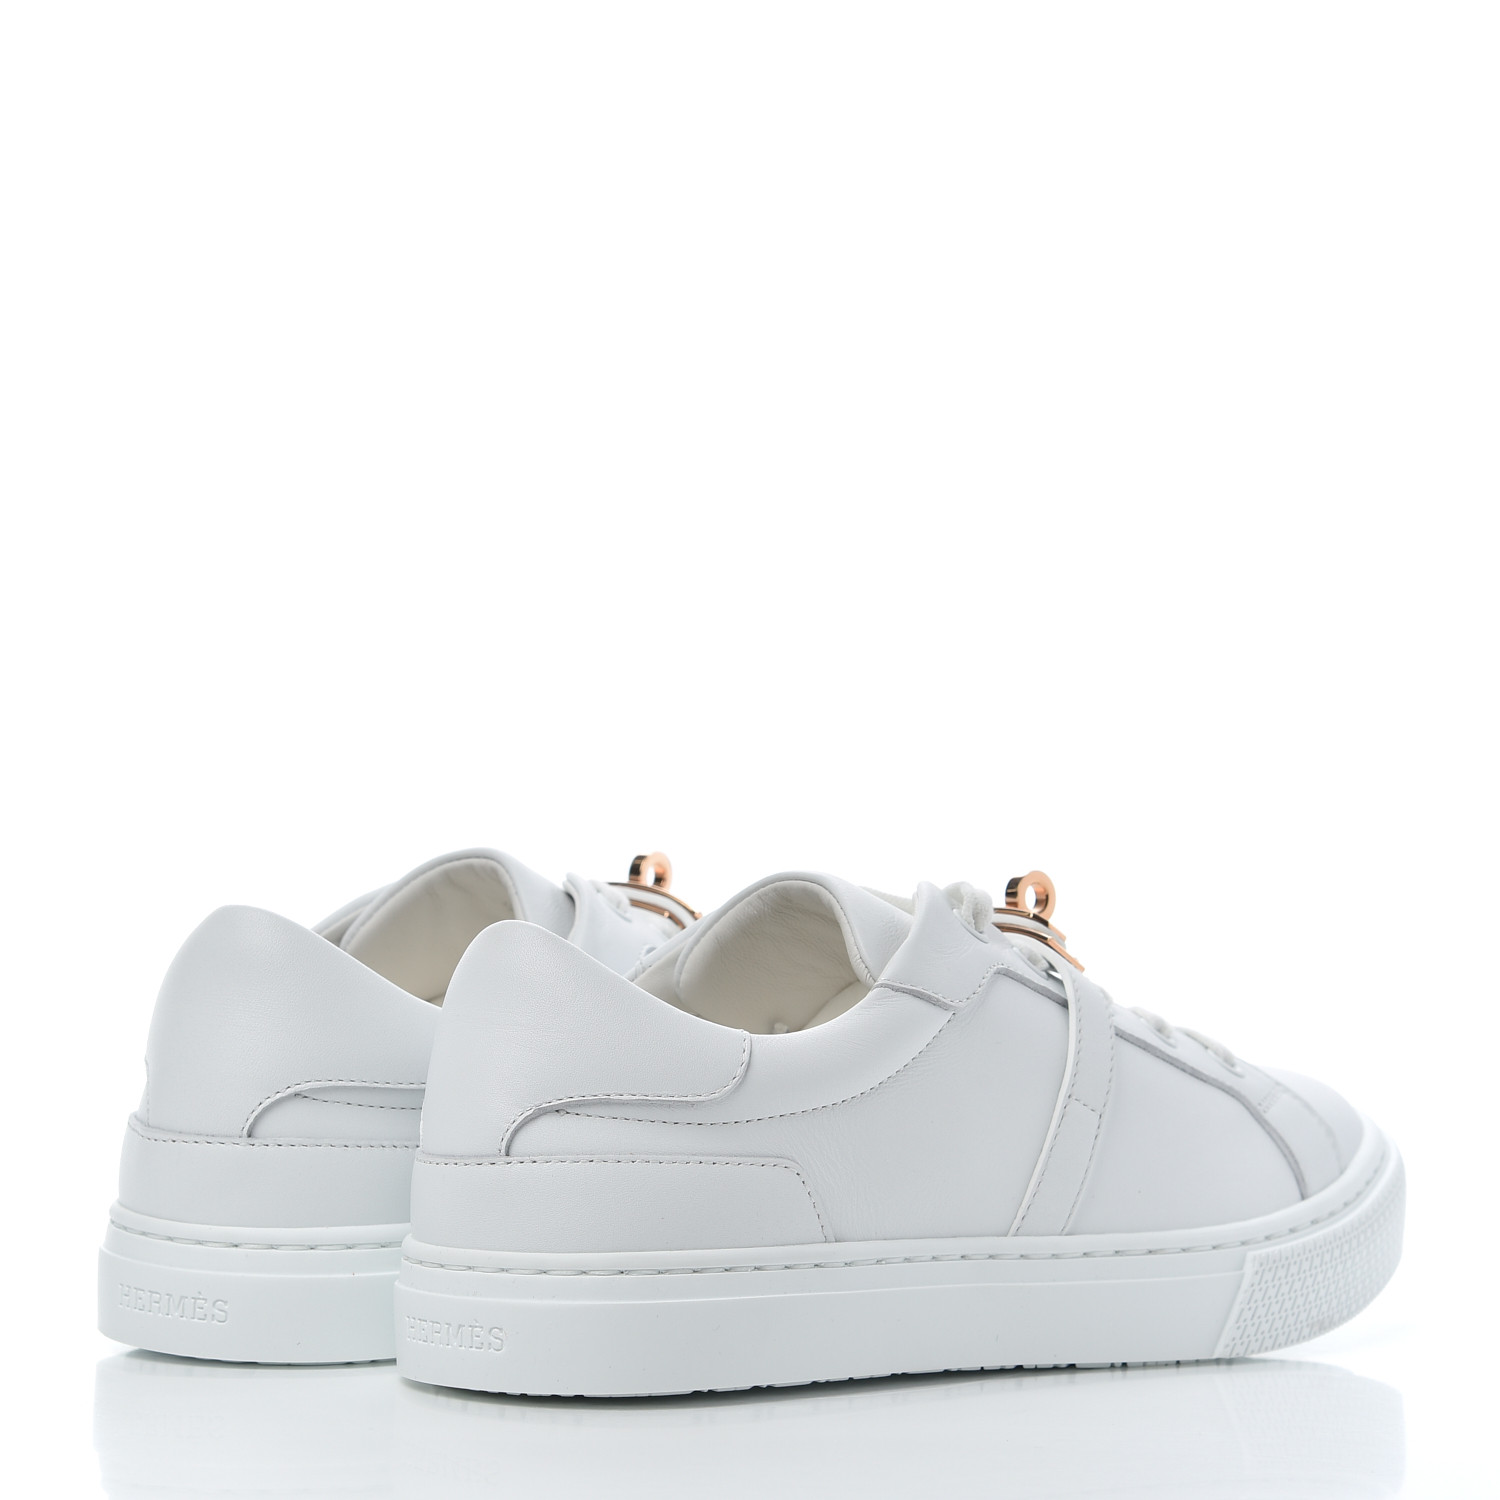 HERMES Calfskin Day Sneakers 37 White 787085 | FASHIONPHILE